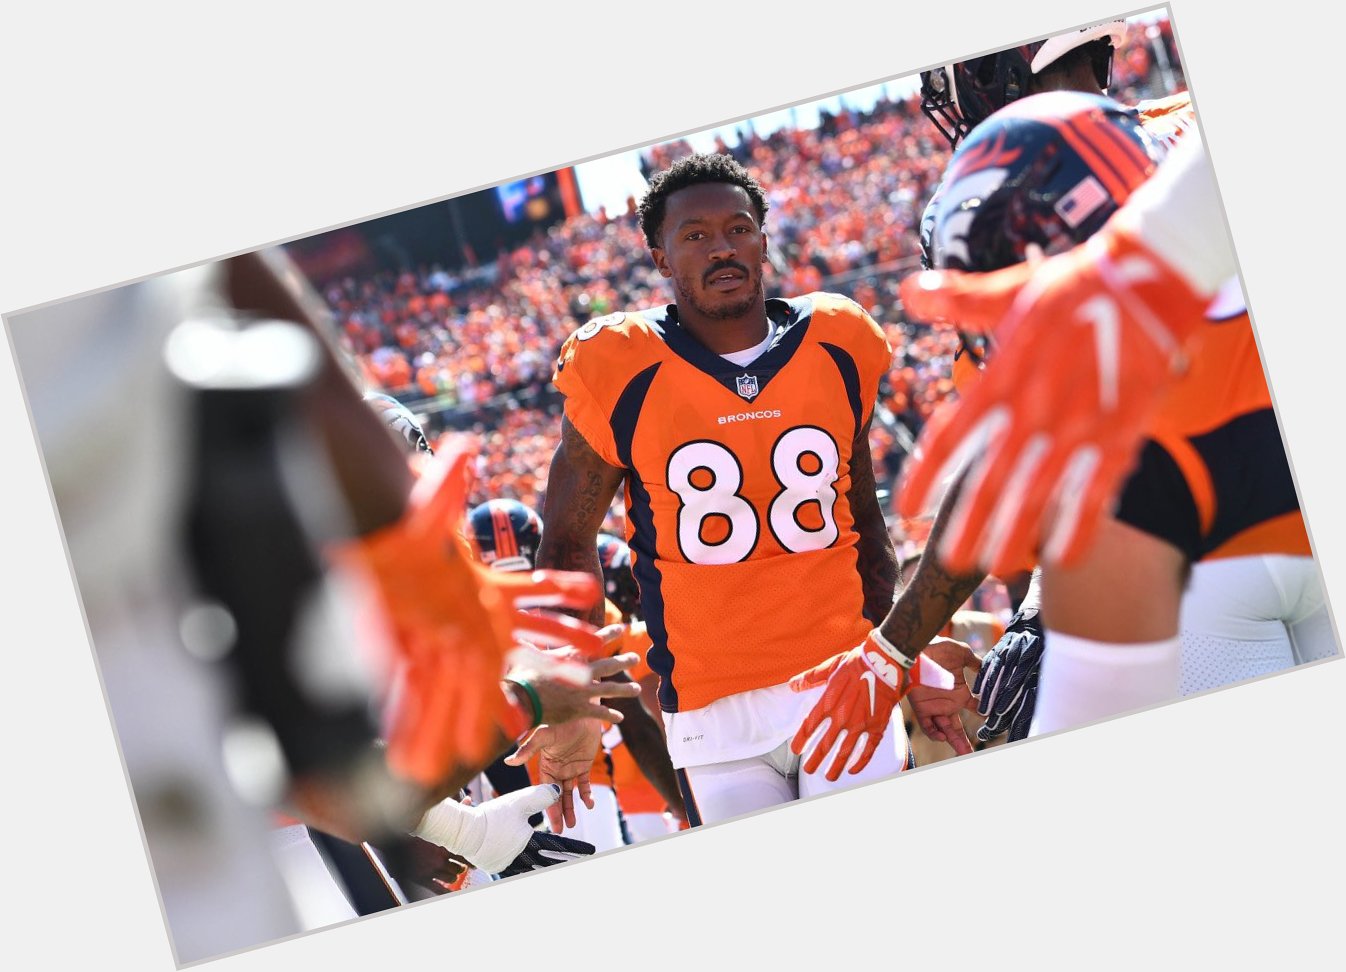 Demaryius Thomas would have turned 34 years old today .

Happy Birthday and Merry Christmas D.T  